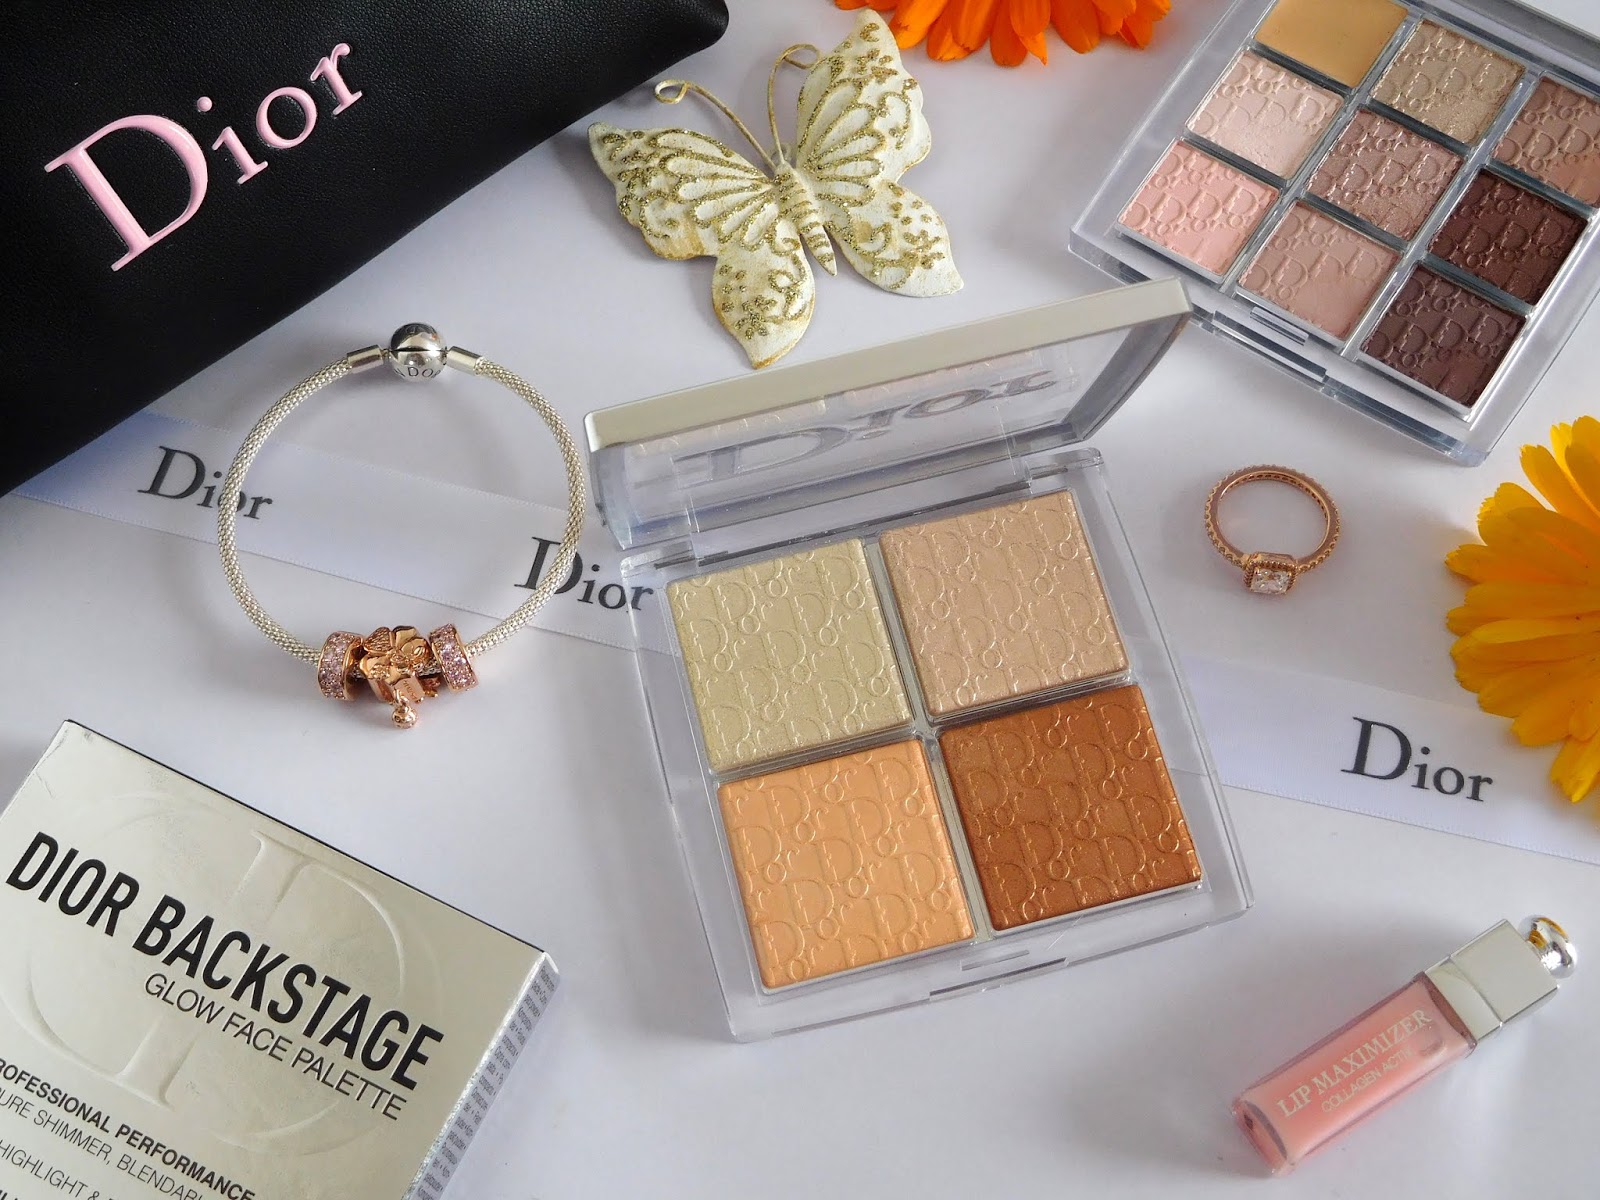 dior backstage glow palette review